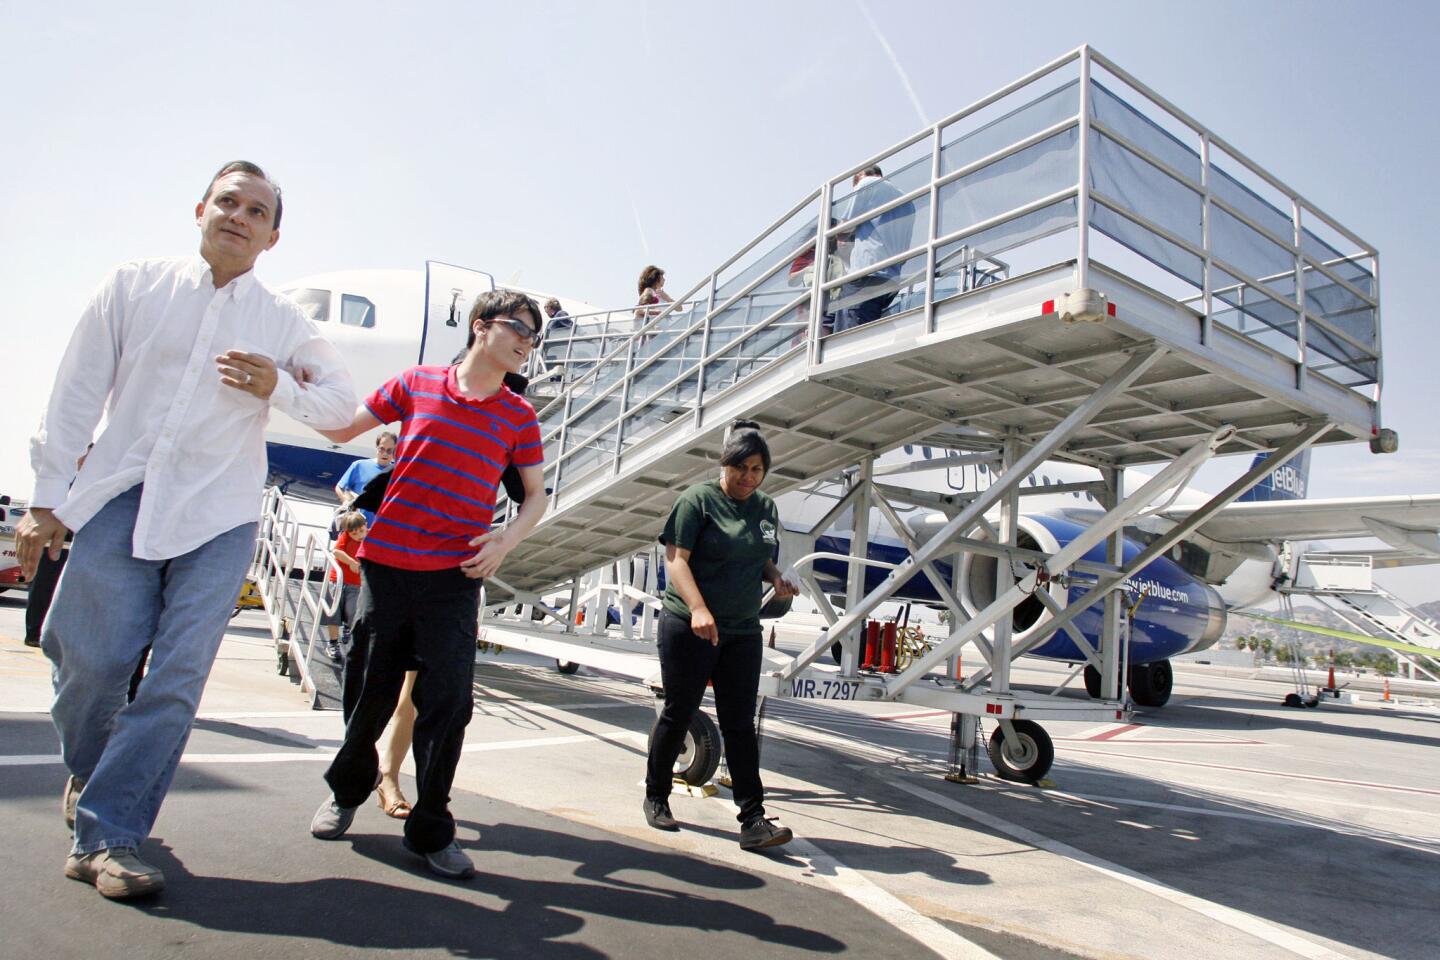 German Barrero, from far left, takes hold of his son, Alessandro, 15, who is autistic, while departing the plane during Jet Blue, Pacific Child and Family and TSA's "Wings for Autism" program, which took place at Bob Hope Airport in Burbank on Saturday, May 4, 2013. JetBlue Airways began "Wings for Autism" in Boston for the last three years and brought the program to California for the first time. Families with autistic children are often fearful of traveling due to the stress that parents may go through. Anxiety, long lines, loud noises and unfamiliarity may affect autistic children. About one in 88 children are autistic.